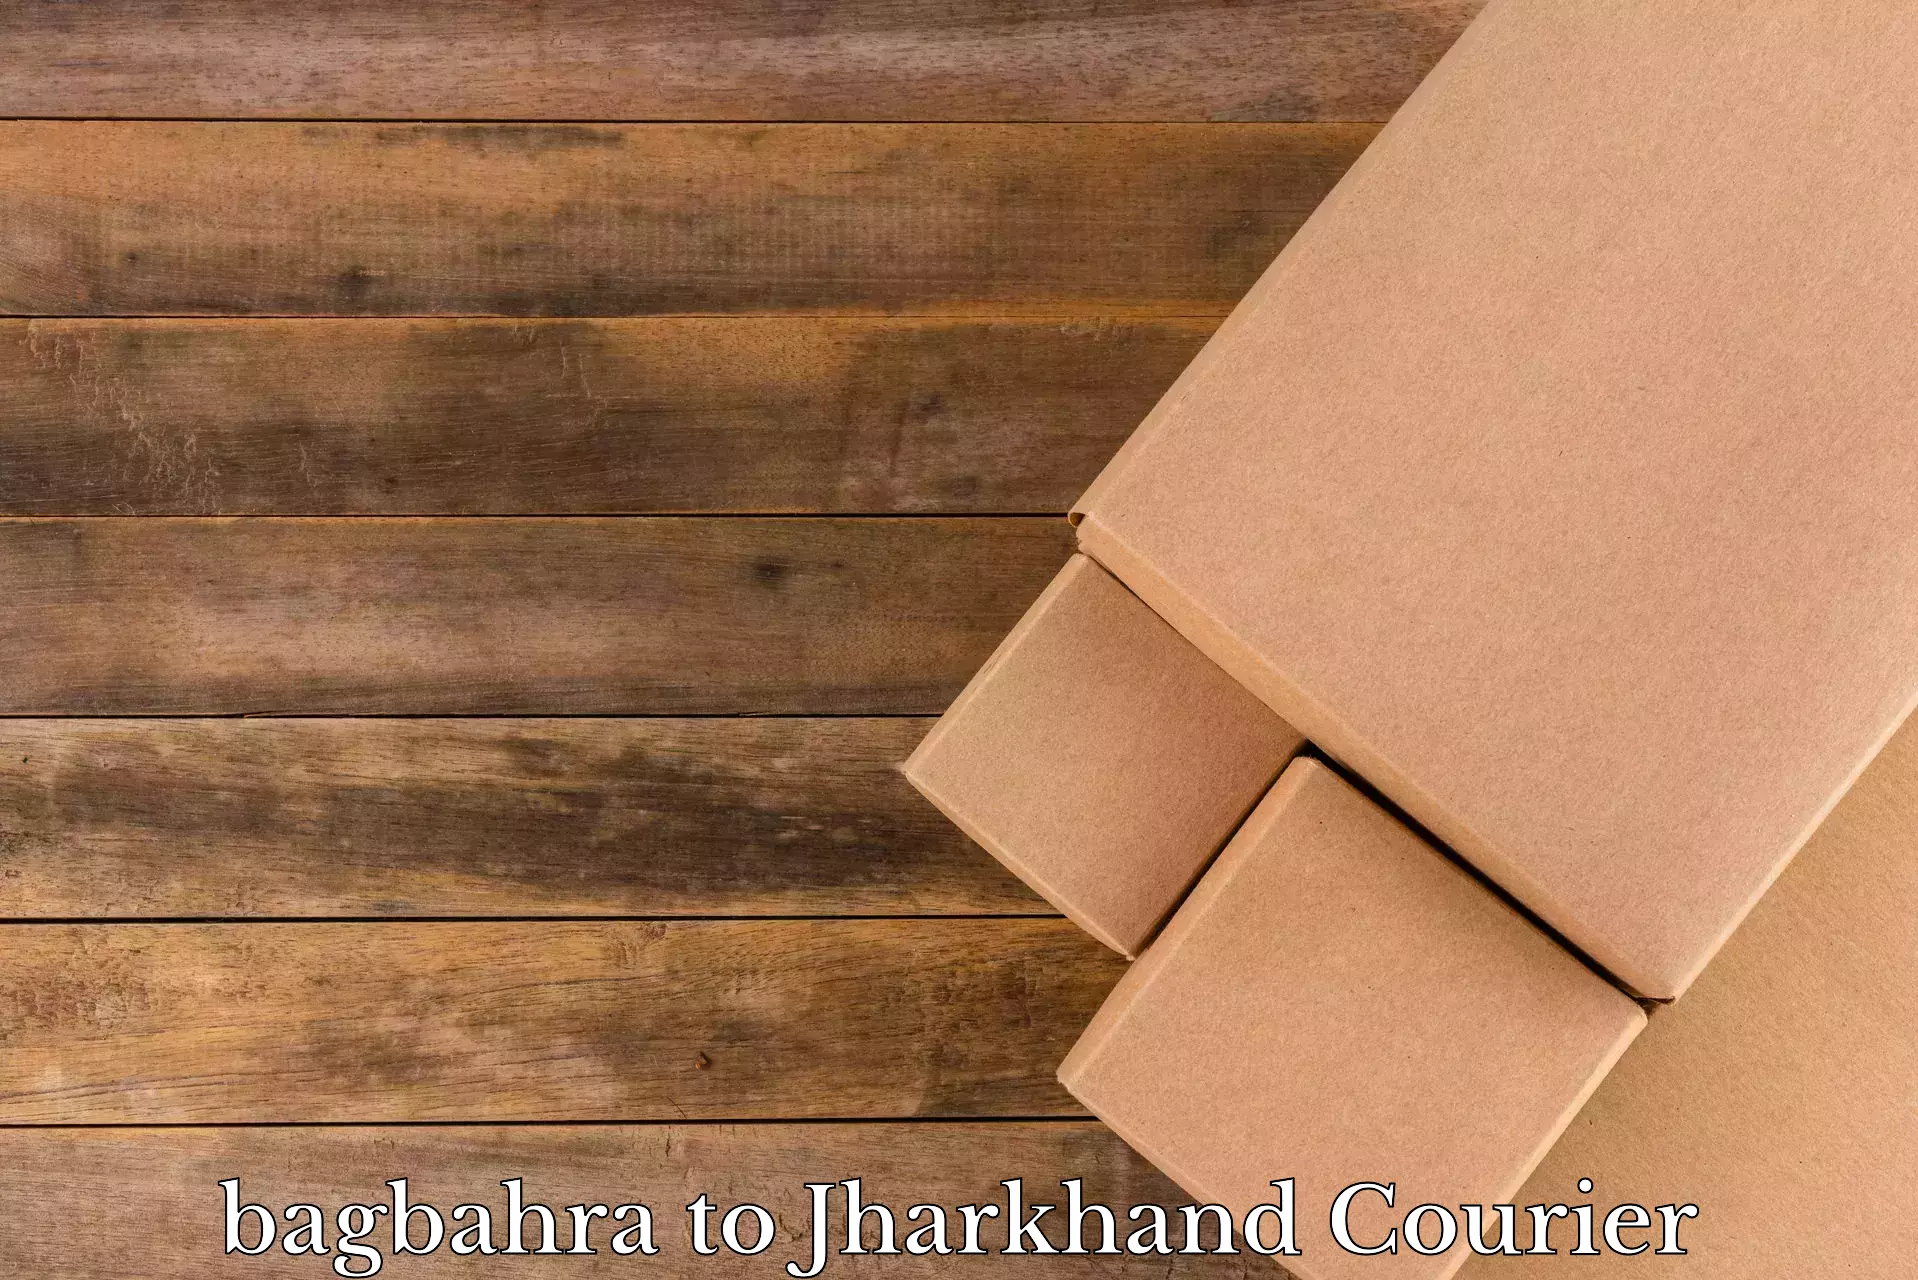 Trusted relocation experts bagbahra to Jharkhand